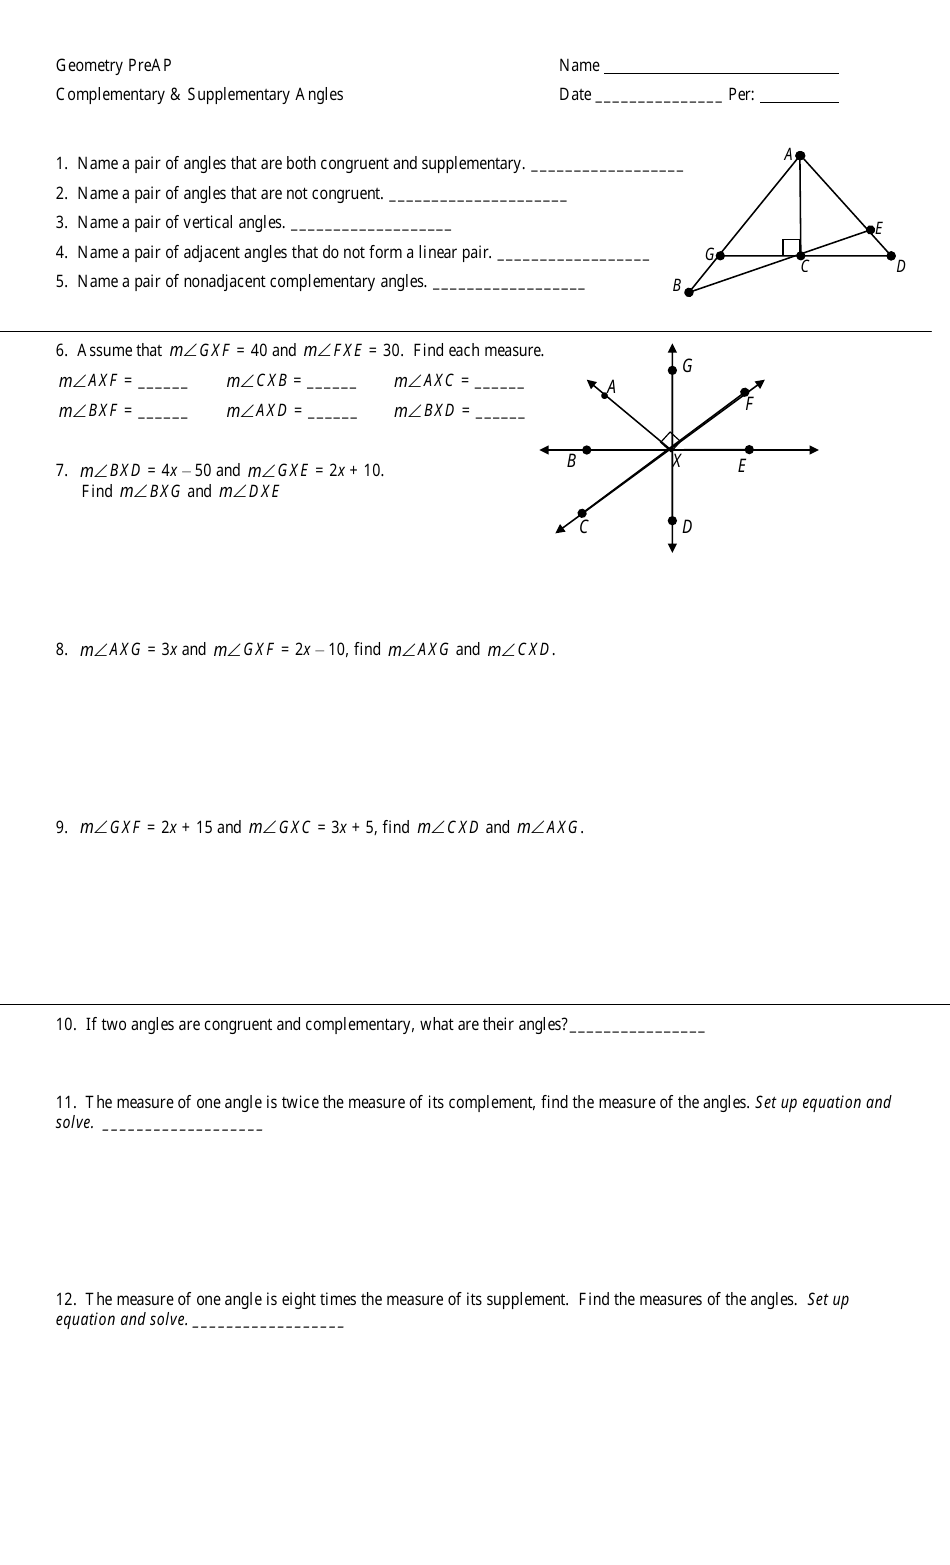 Geometry Preap Complementary and Supplementary Angles Worksheet For Finding Angle Measures Worksheet